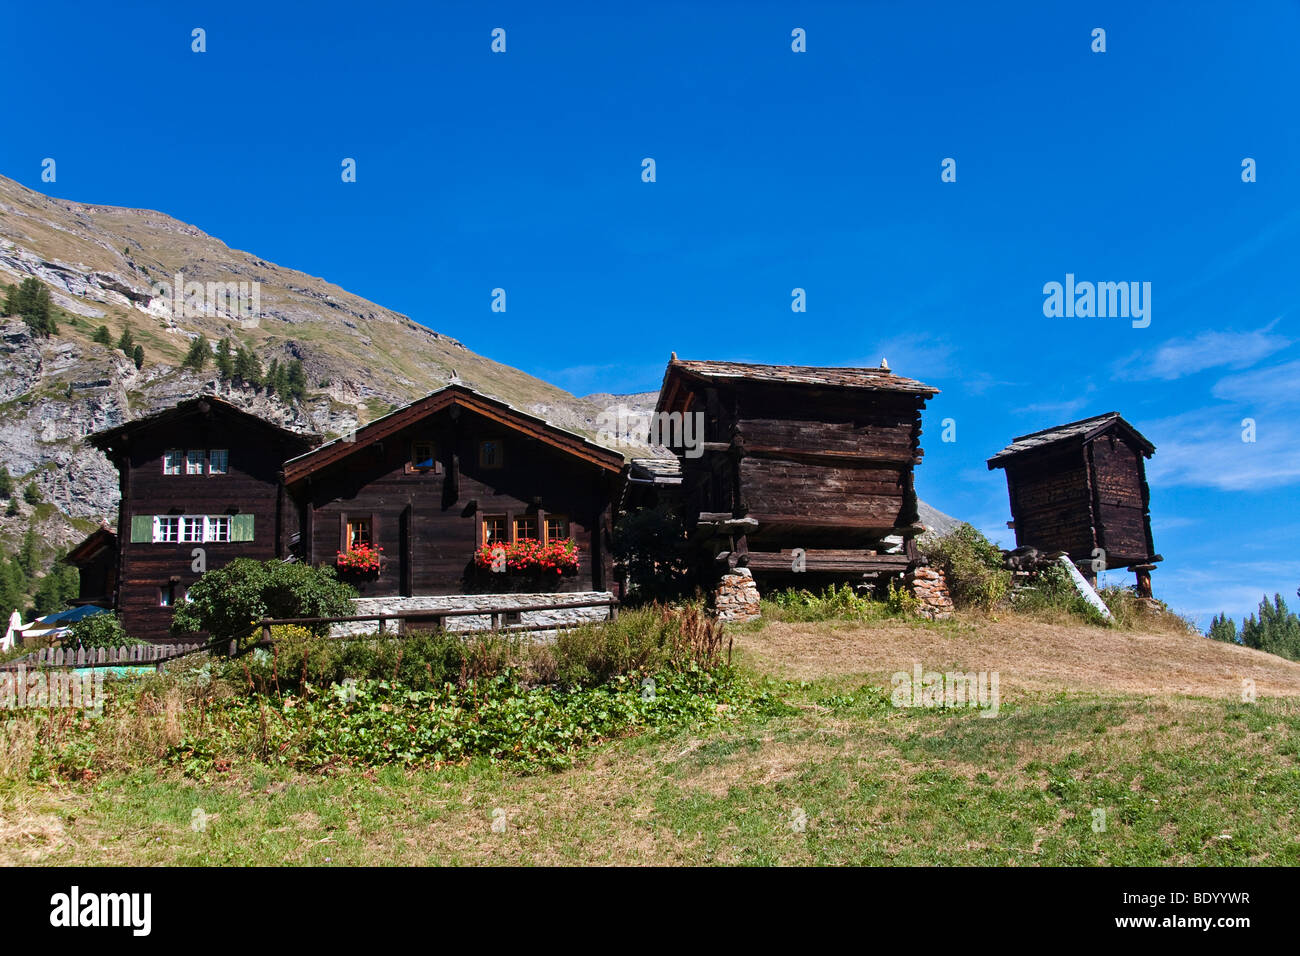 Stadels: The age-old barns that fed the Alps